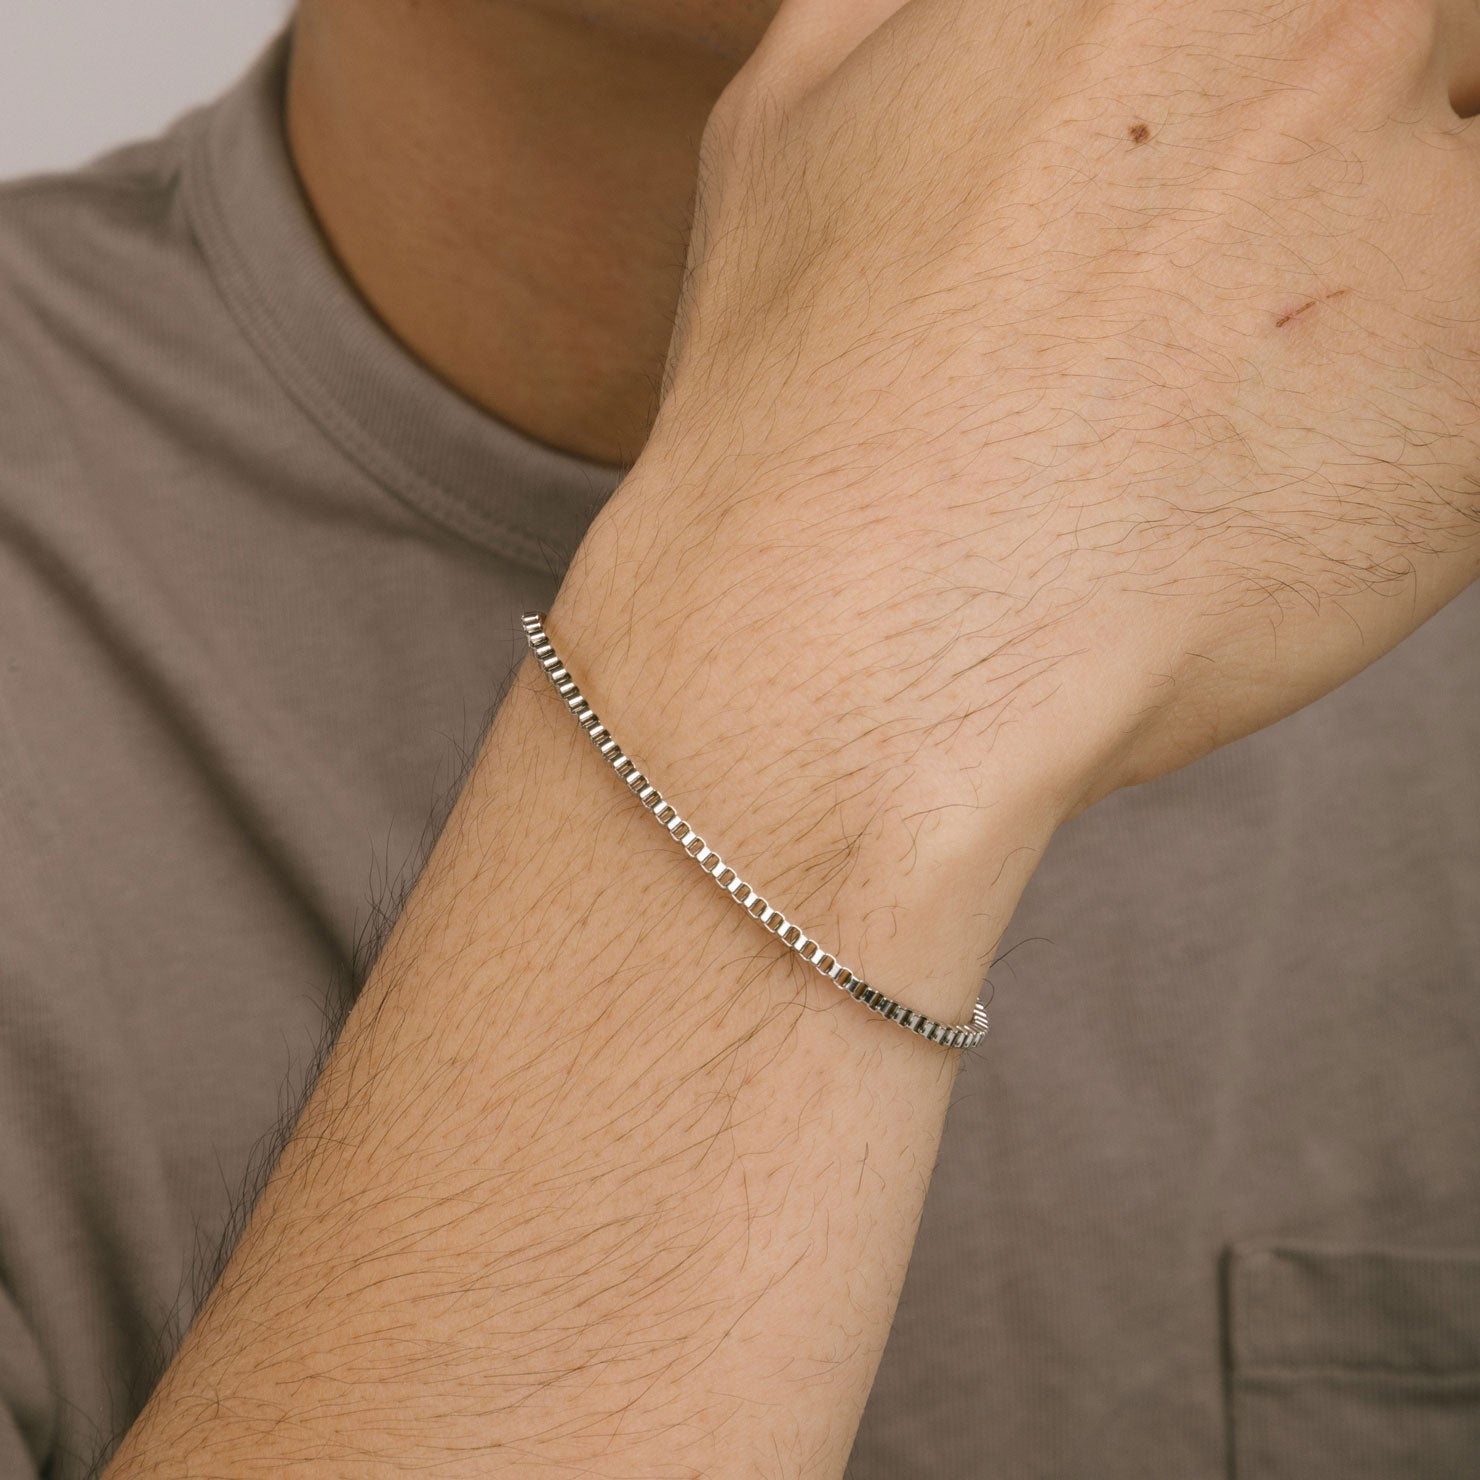 A model wearing the Box Chain Bracelet in Silver is Stainless Steel, offering a non-tarnish, water-resistant finish.